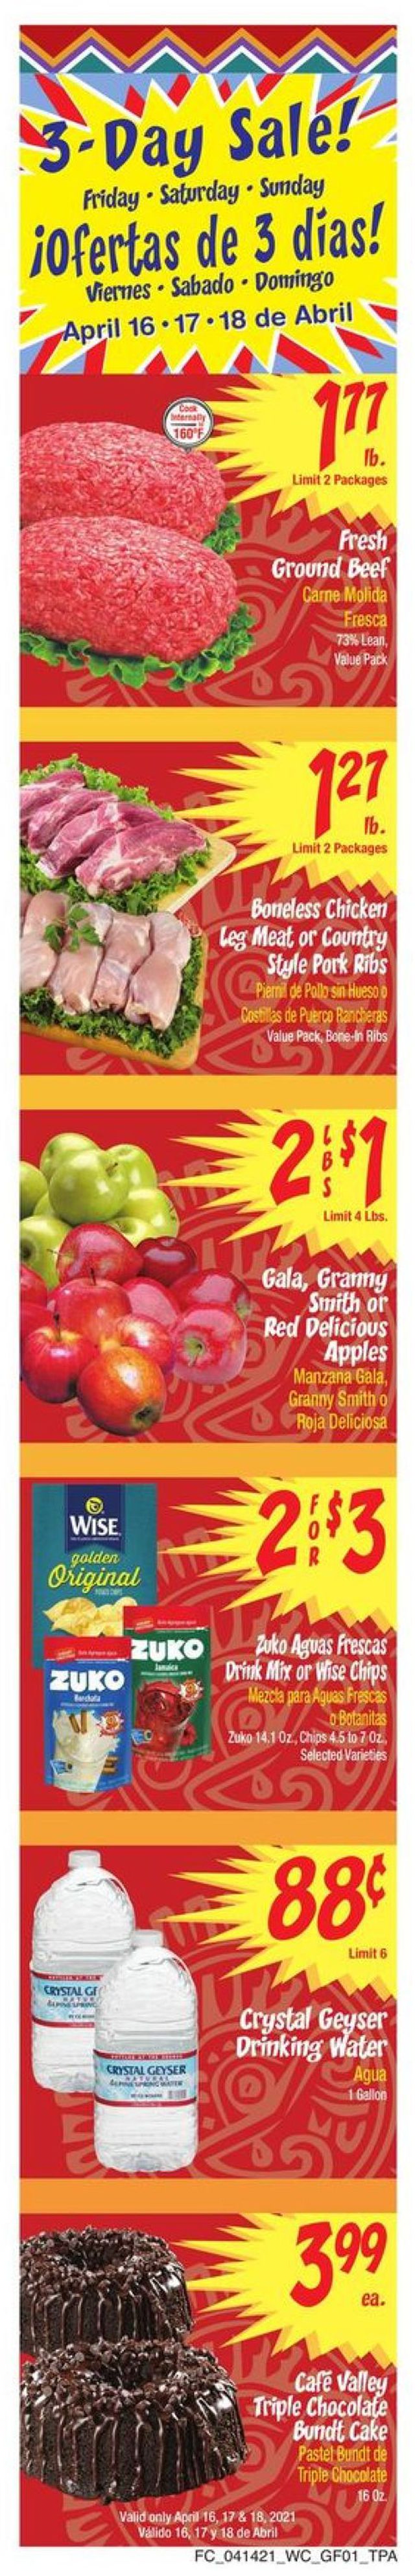 Food City Ad from 04/14/2021